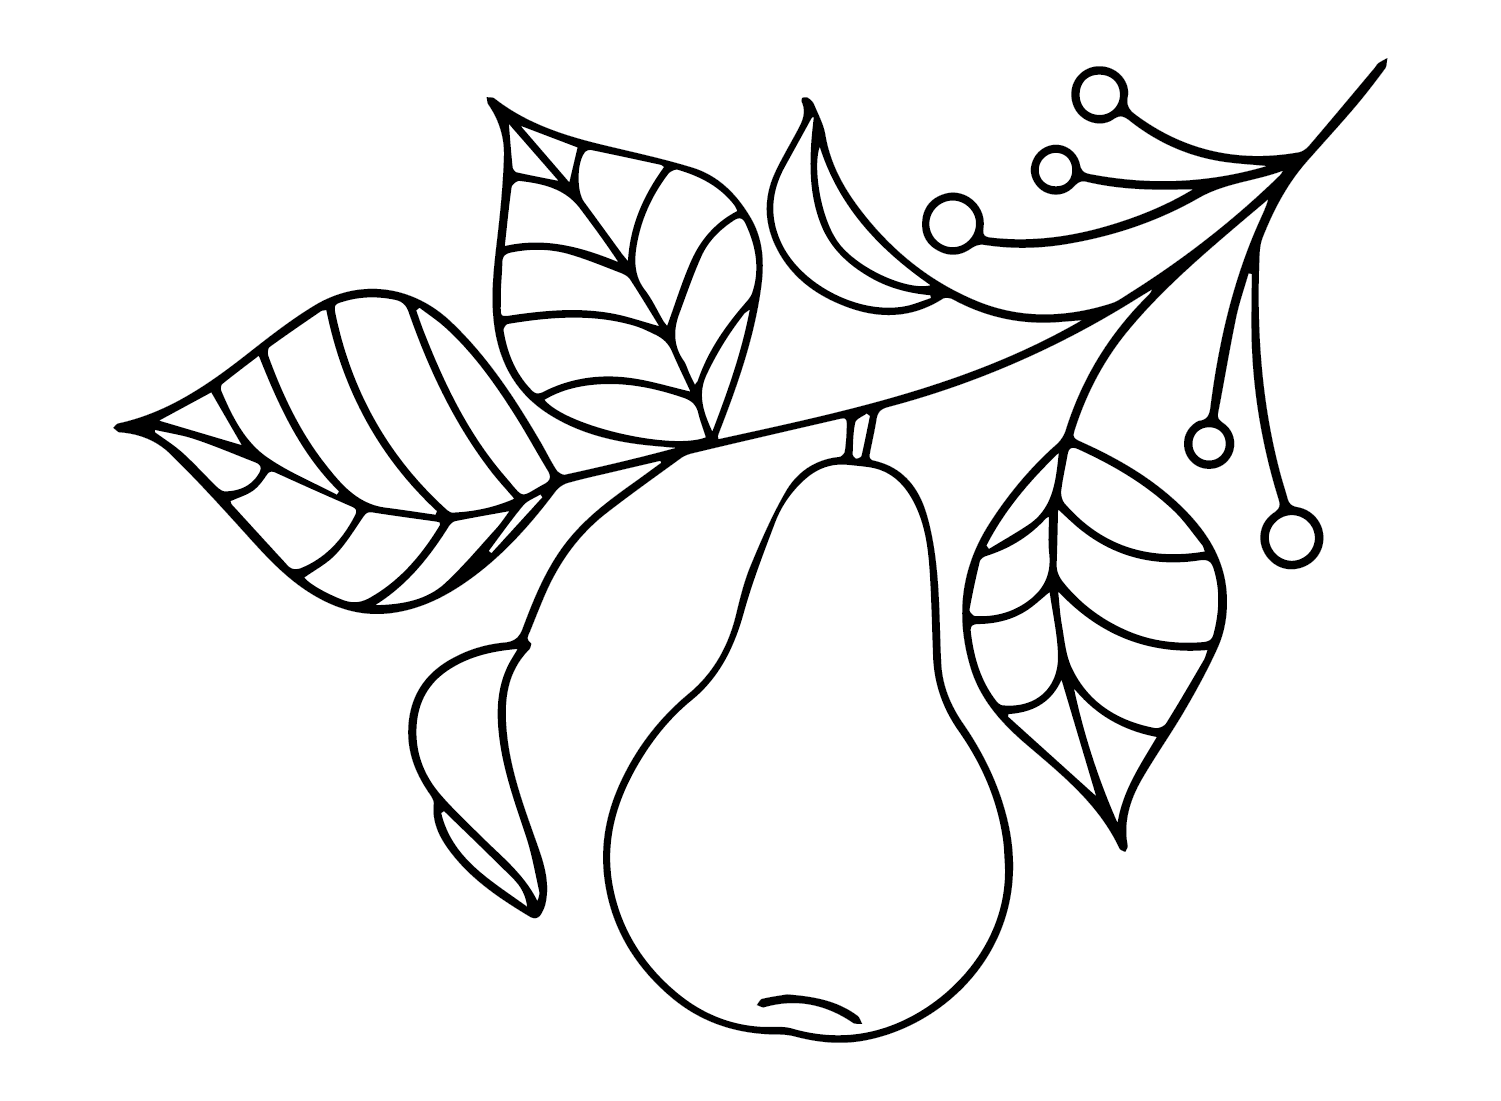 Free Pears Coloring Page